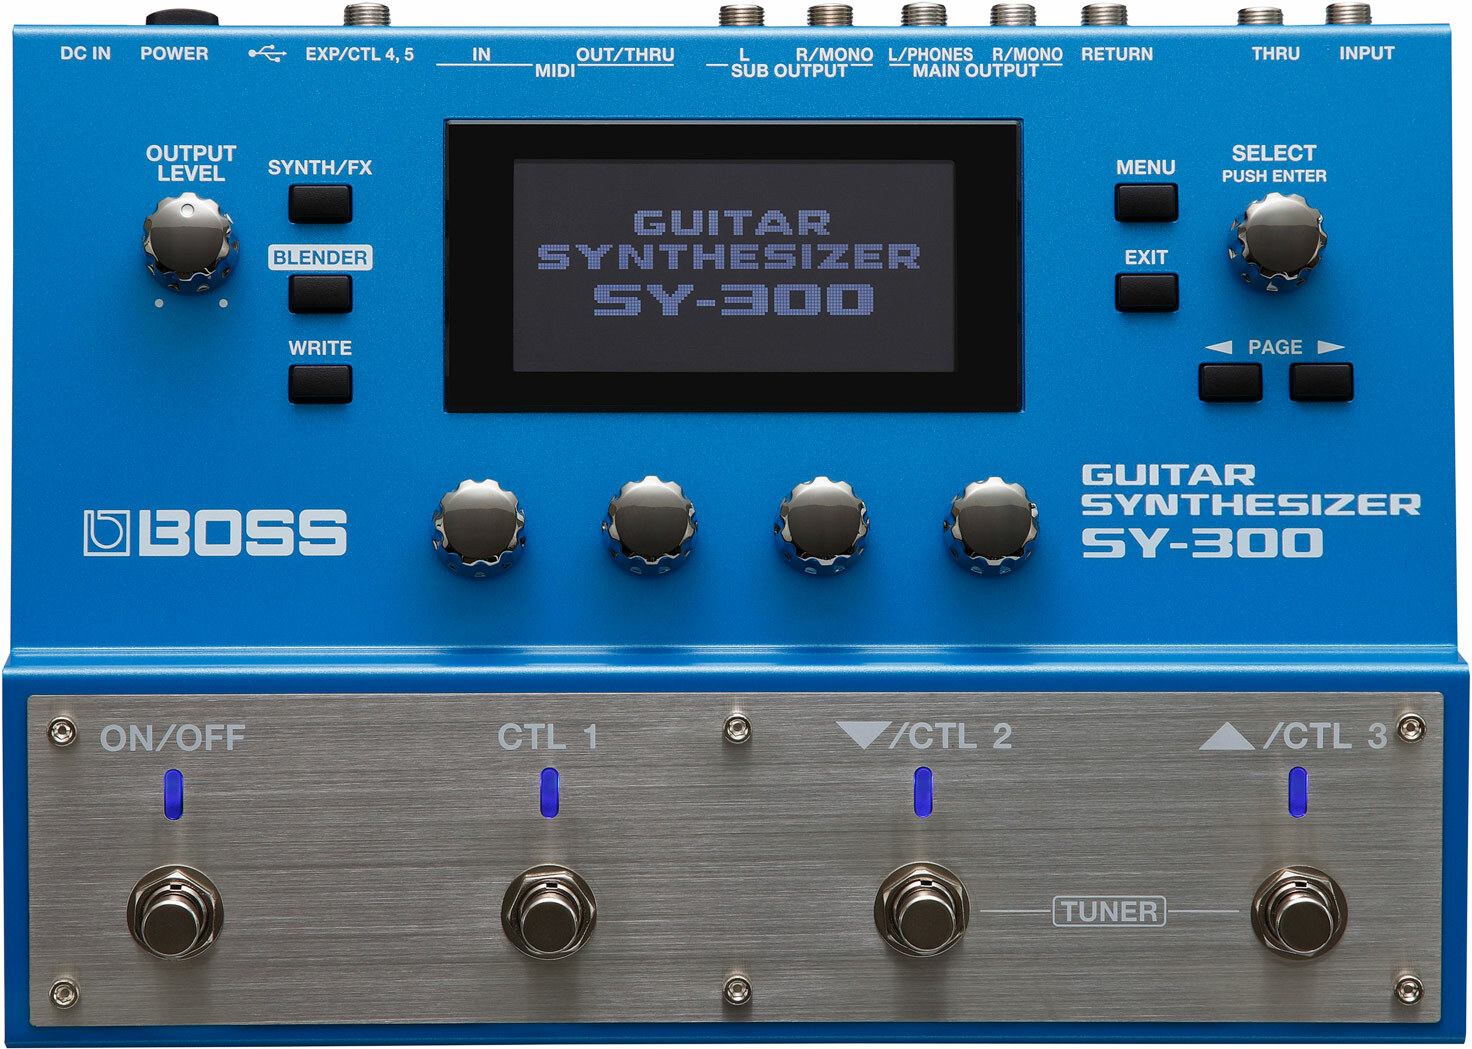 Boss Sy-300 Guitar Synthesizer - - Guitar Synthesizer - Main picture